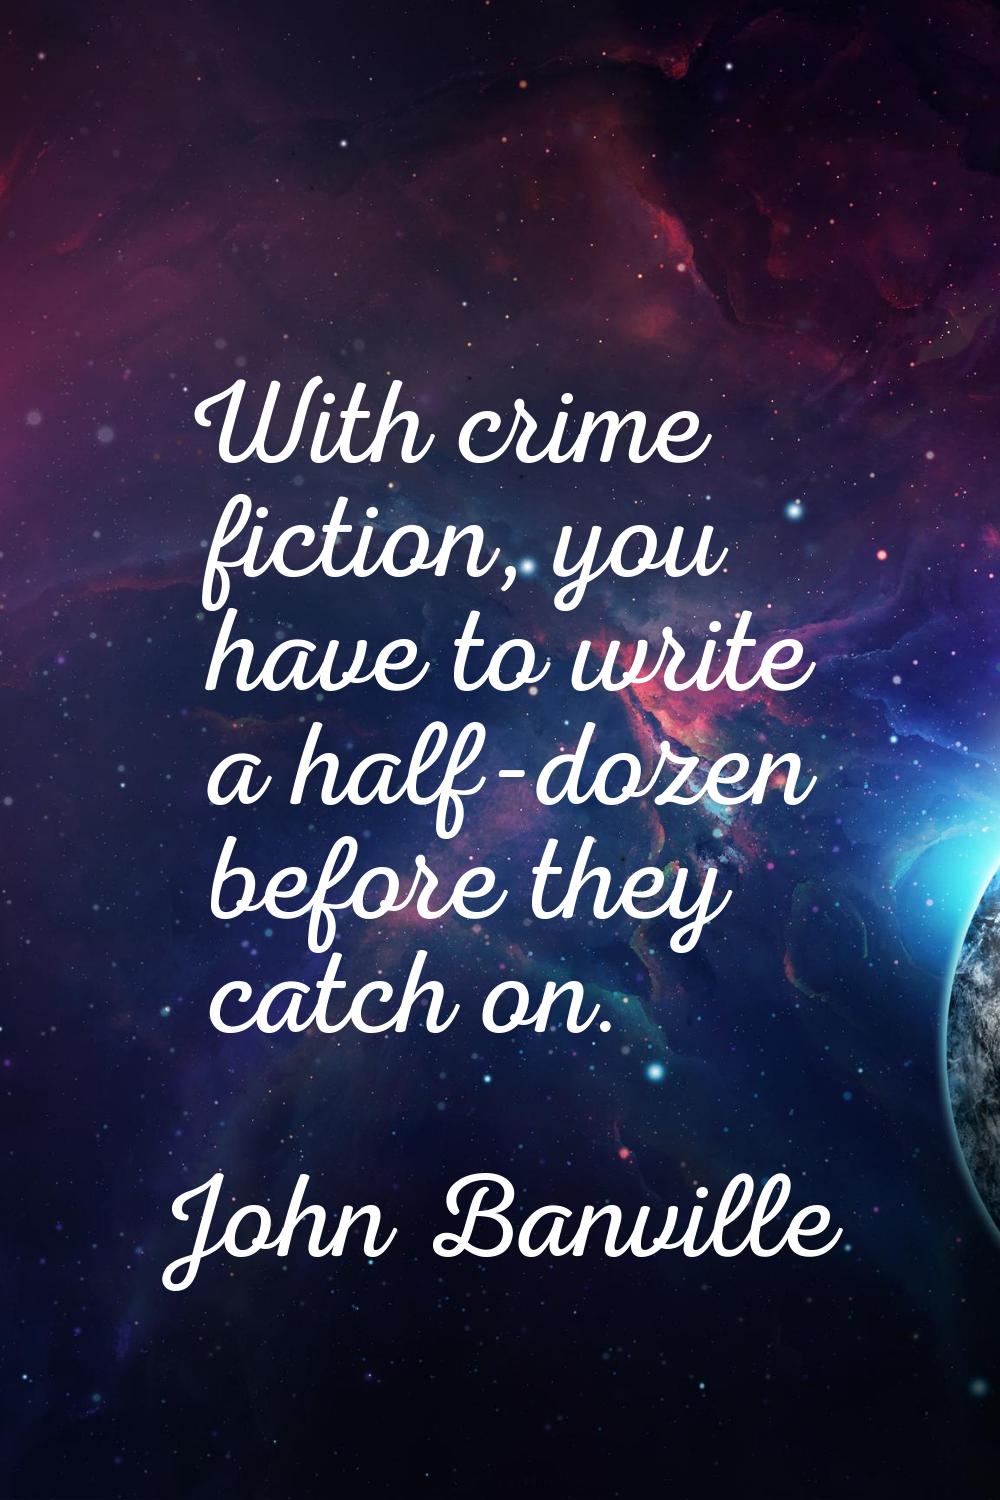 With crime fiction, you have to write a half-dozen before they catch on.